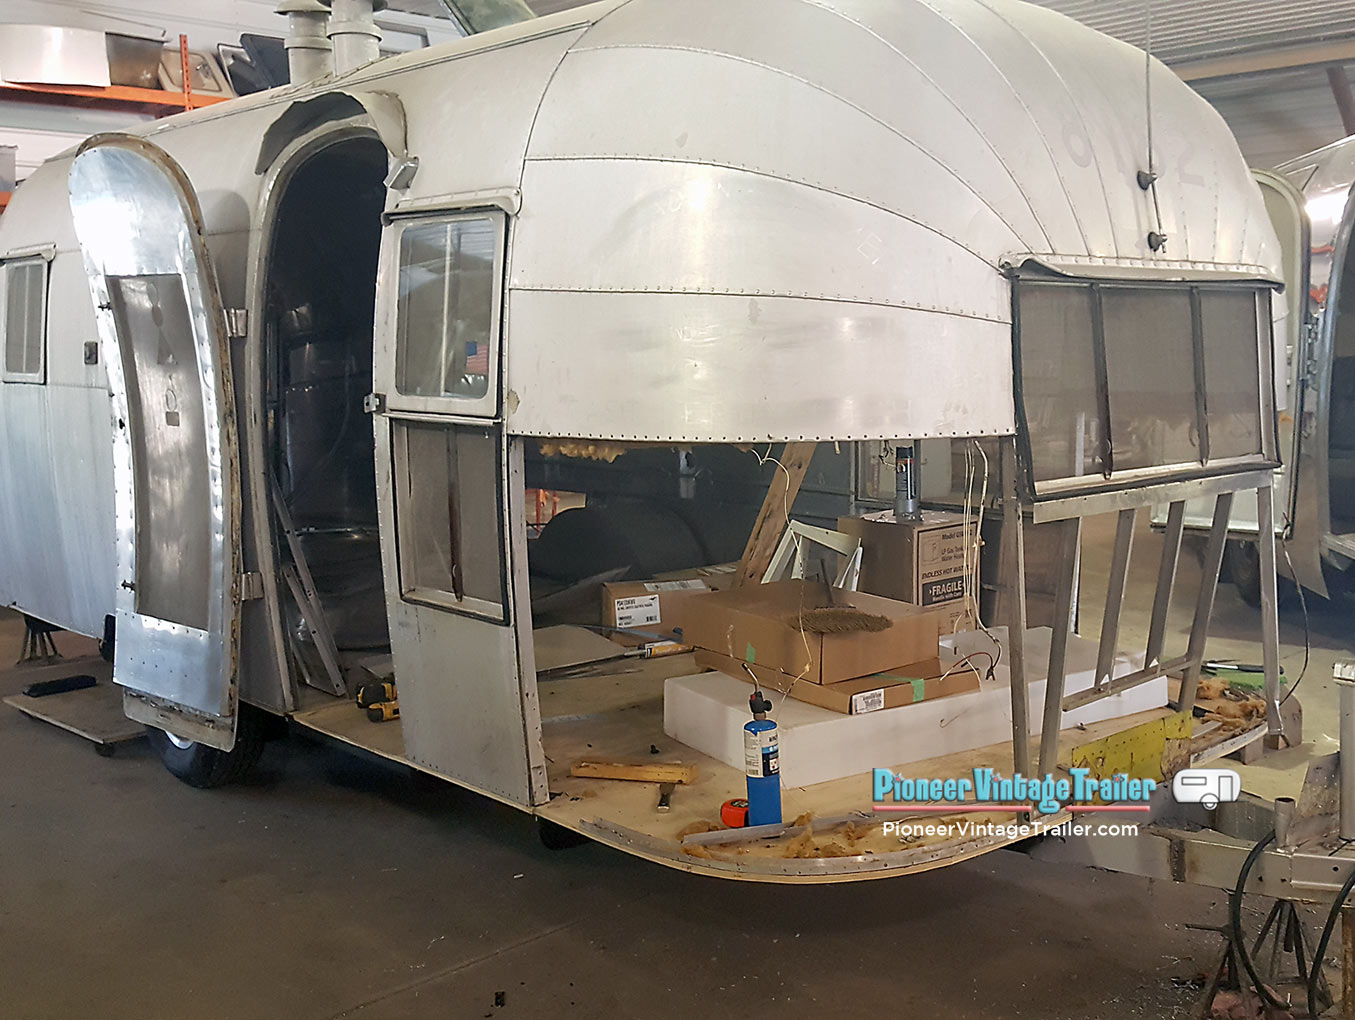 1957 Airstream Caravanner getting new front panels